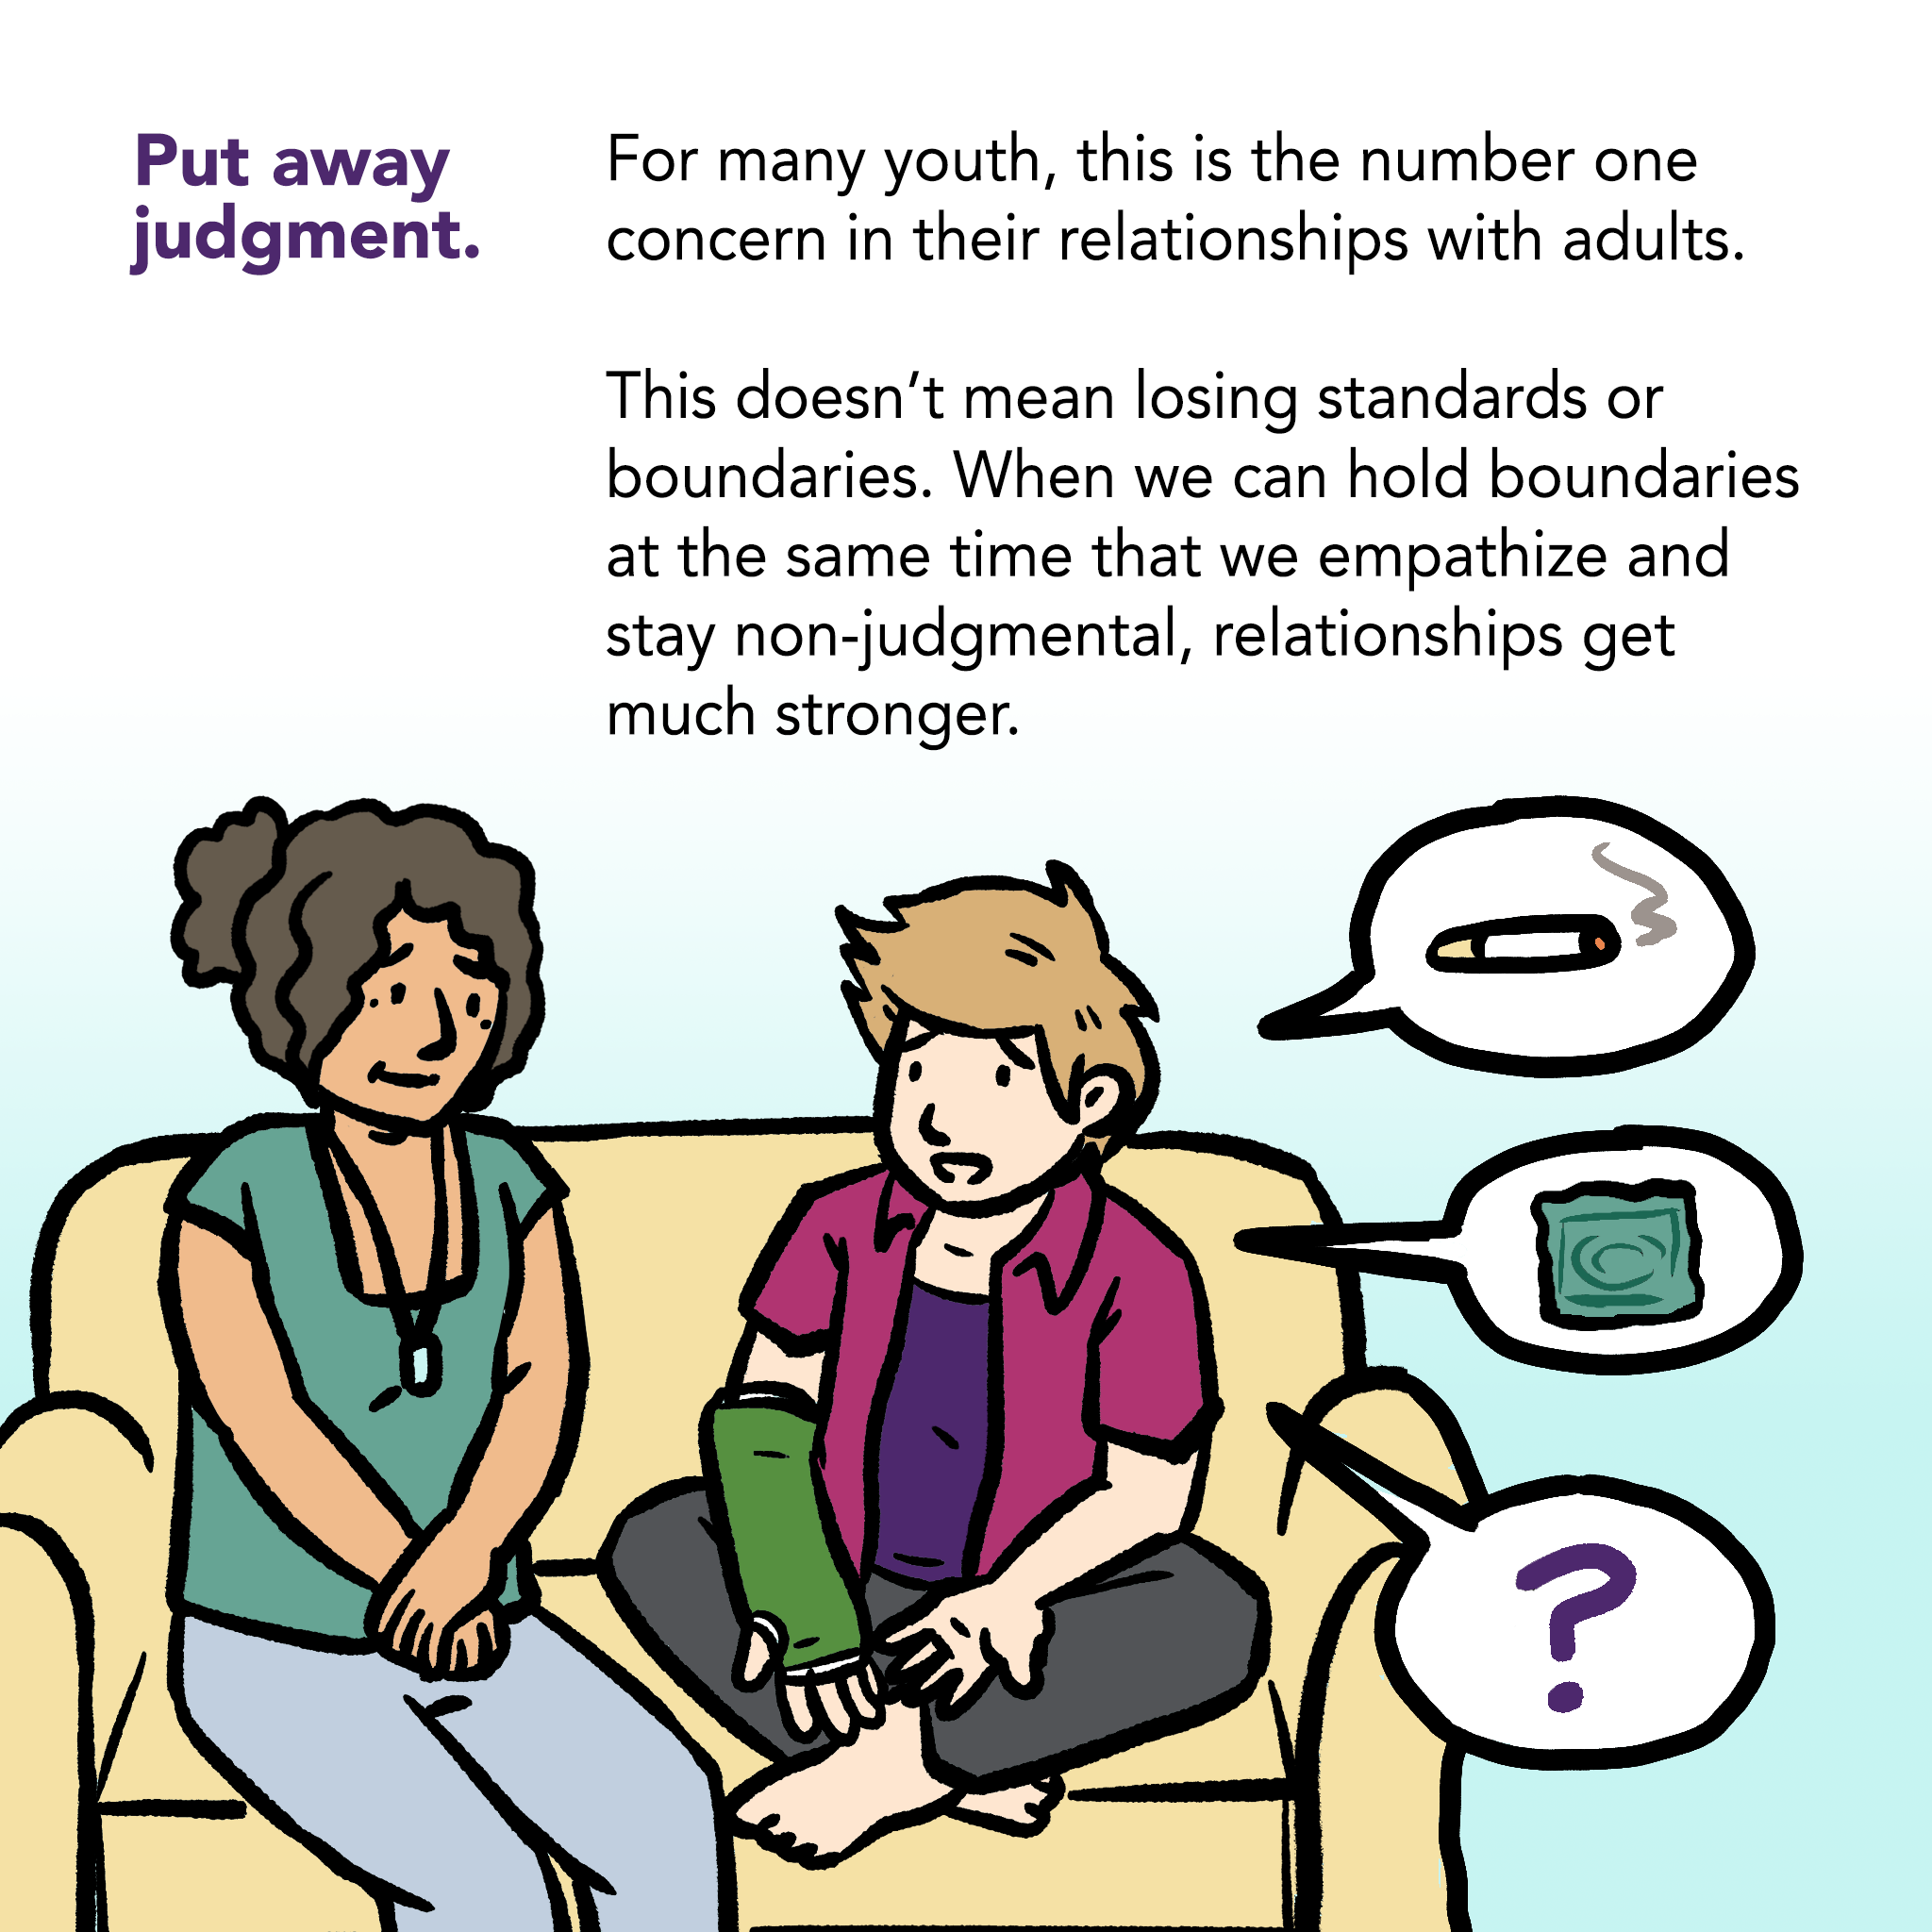 Image of an adult and a youth sitting on a couch. Adult is listening. Youth is talking. Word bubbles from youth show images of a cigarette, a condom in a wrapper, and a question mark. Caption says "Put away judgment. For many youth, this is the number one concern in their relationships with adults. This doesn't mean losing standards or boundaries. When we can hold boundaries at the same time that we empathize and stay non-judgmental, relationships get much stronger.